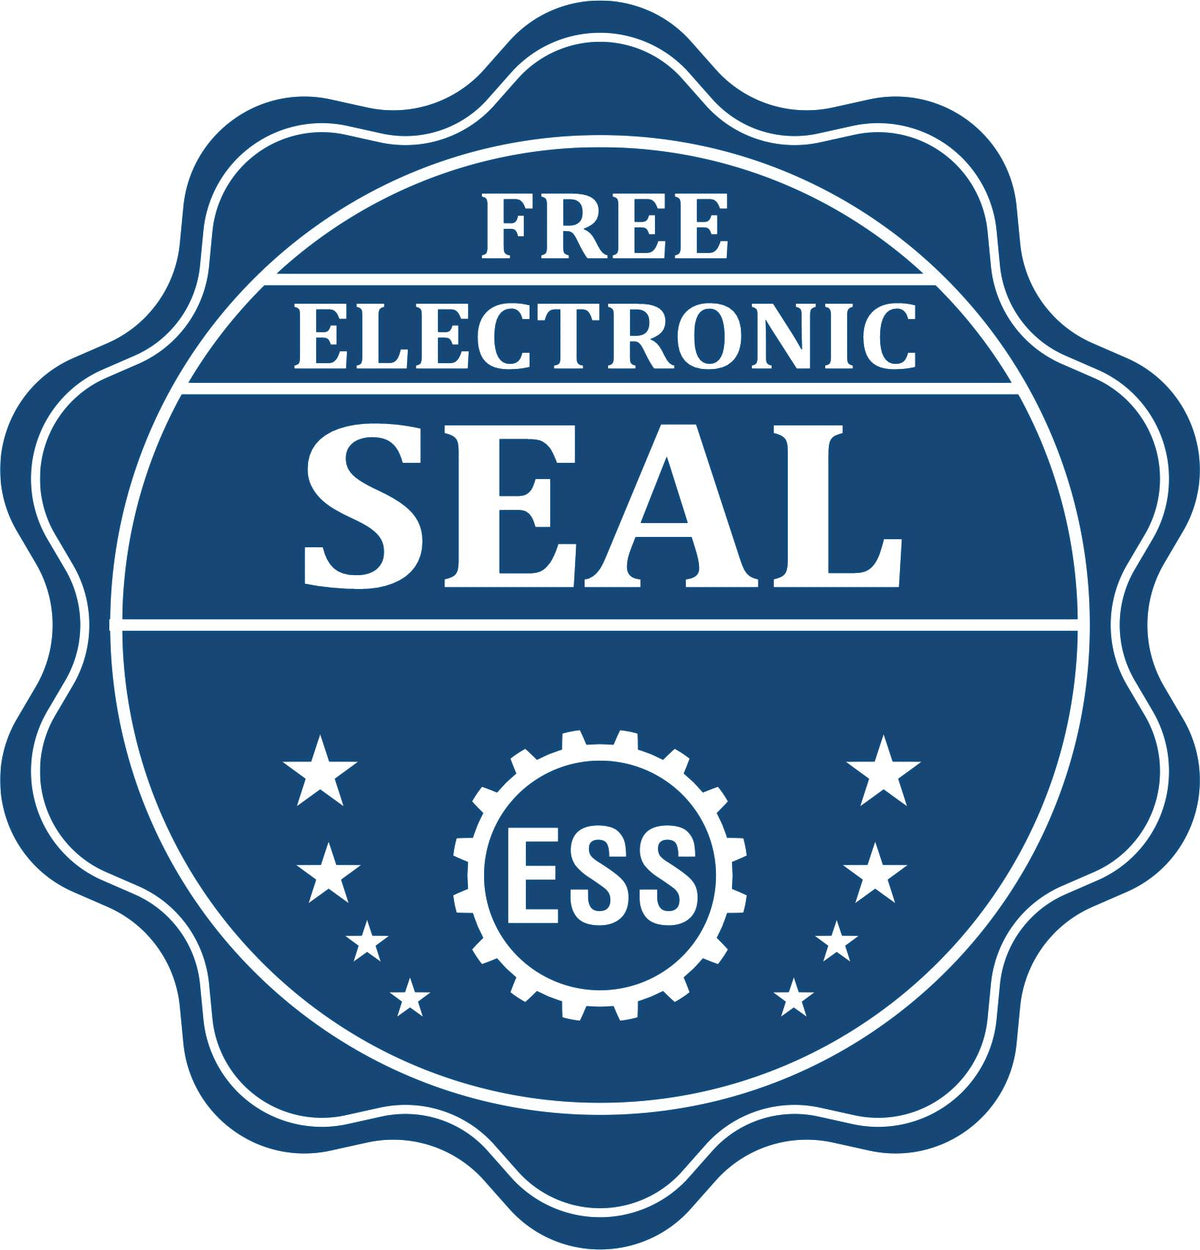 A badge showing a free electronic seal for the Soft Pocket Arizona Landscape Architect Embosser with stars and the ESS gear on the emblem.